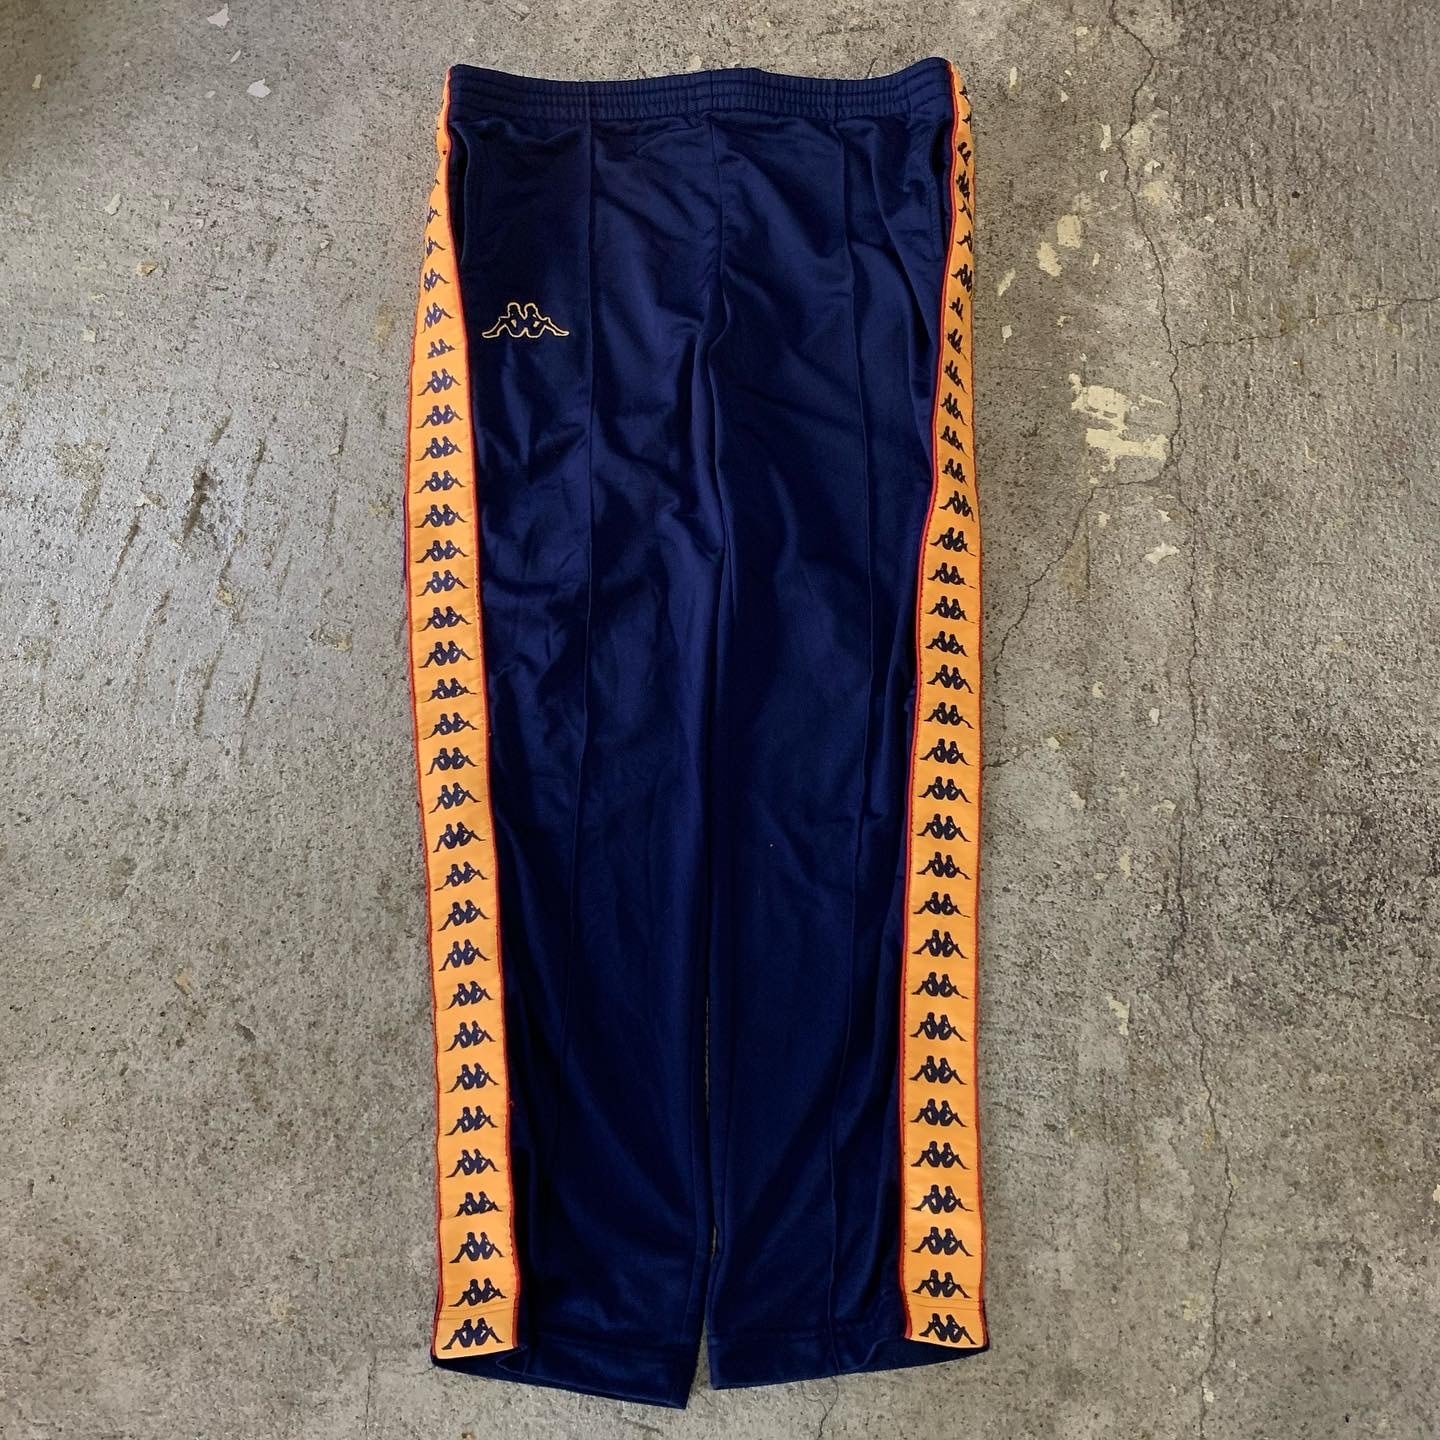 90s KAPPA track pants | What'z up